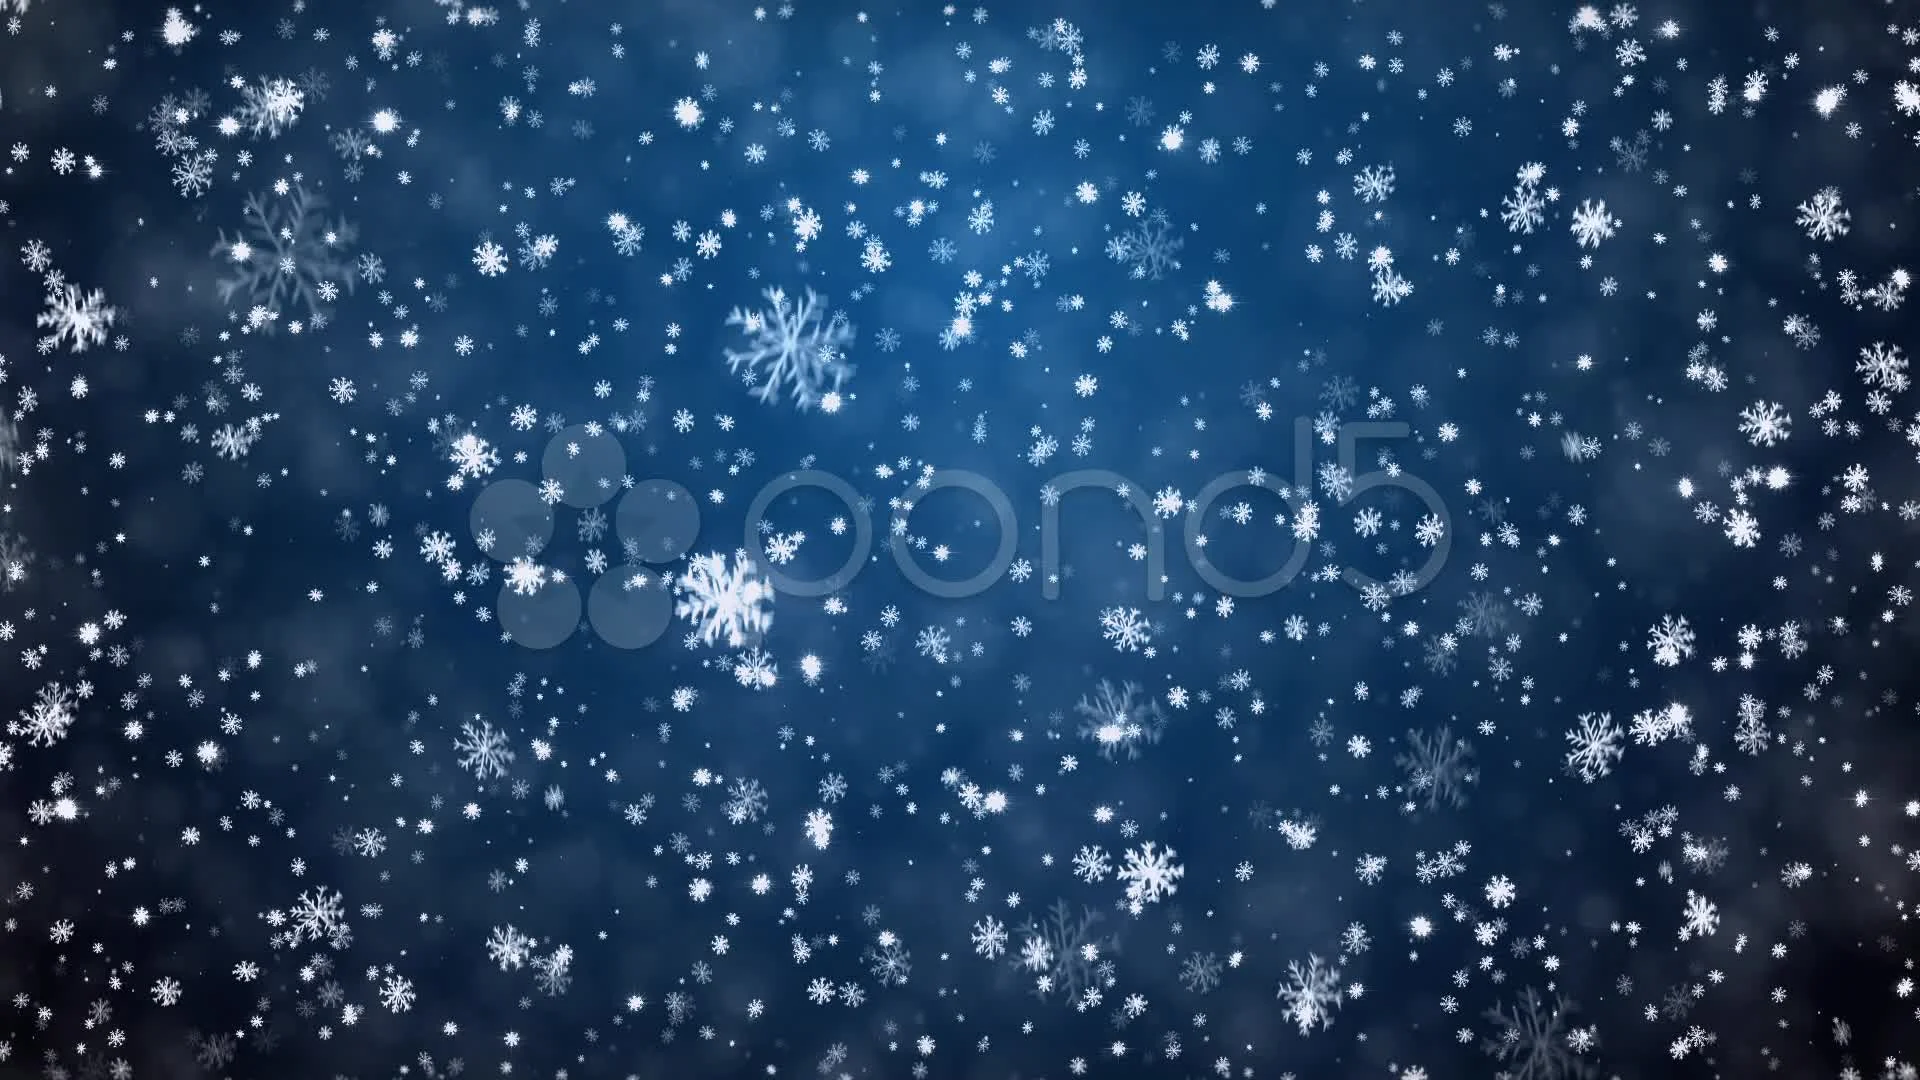 falling snow background